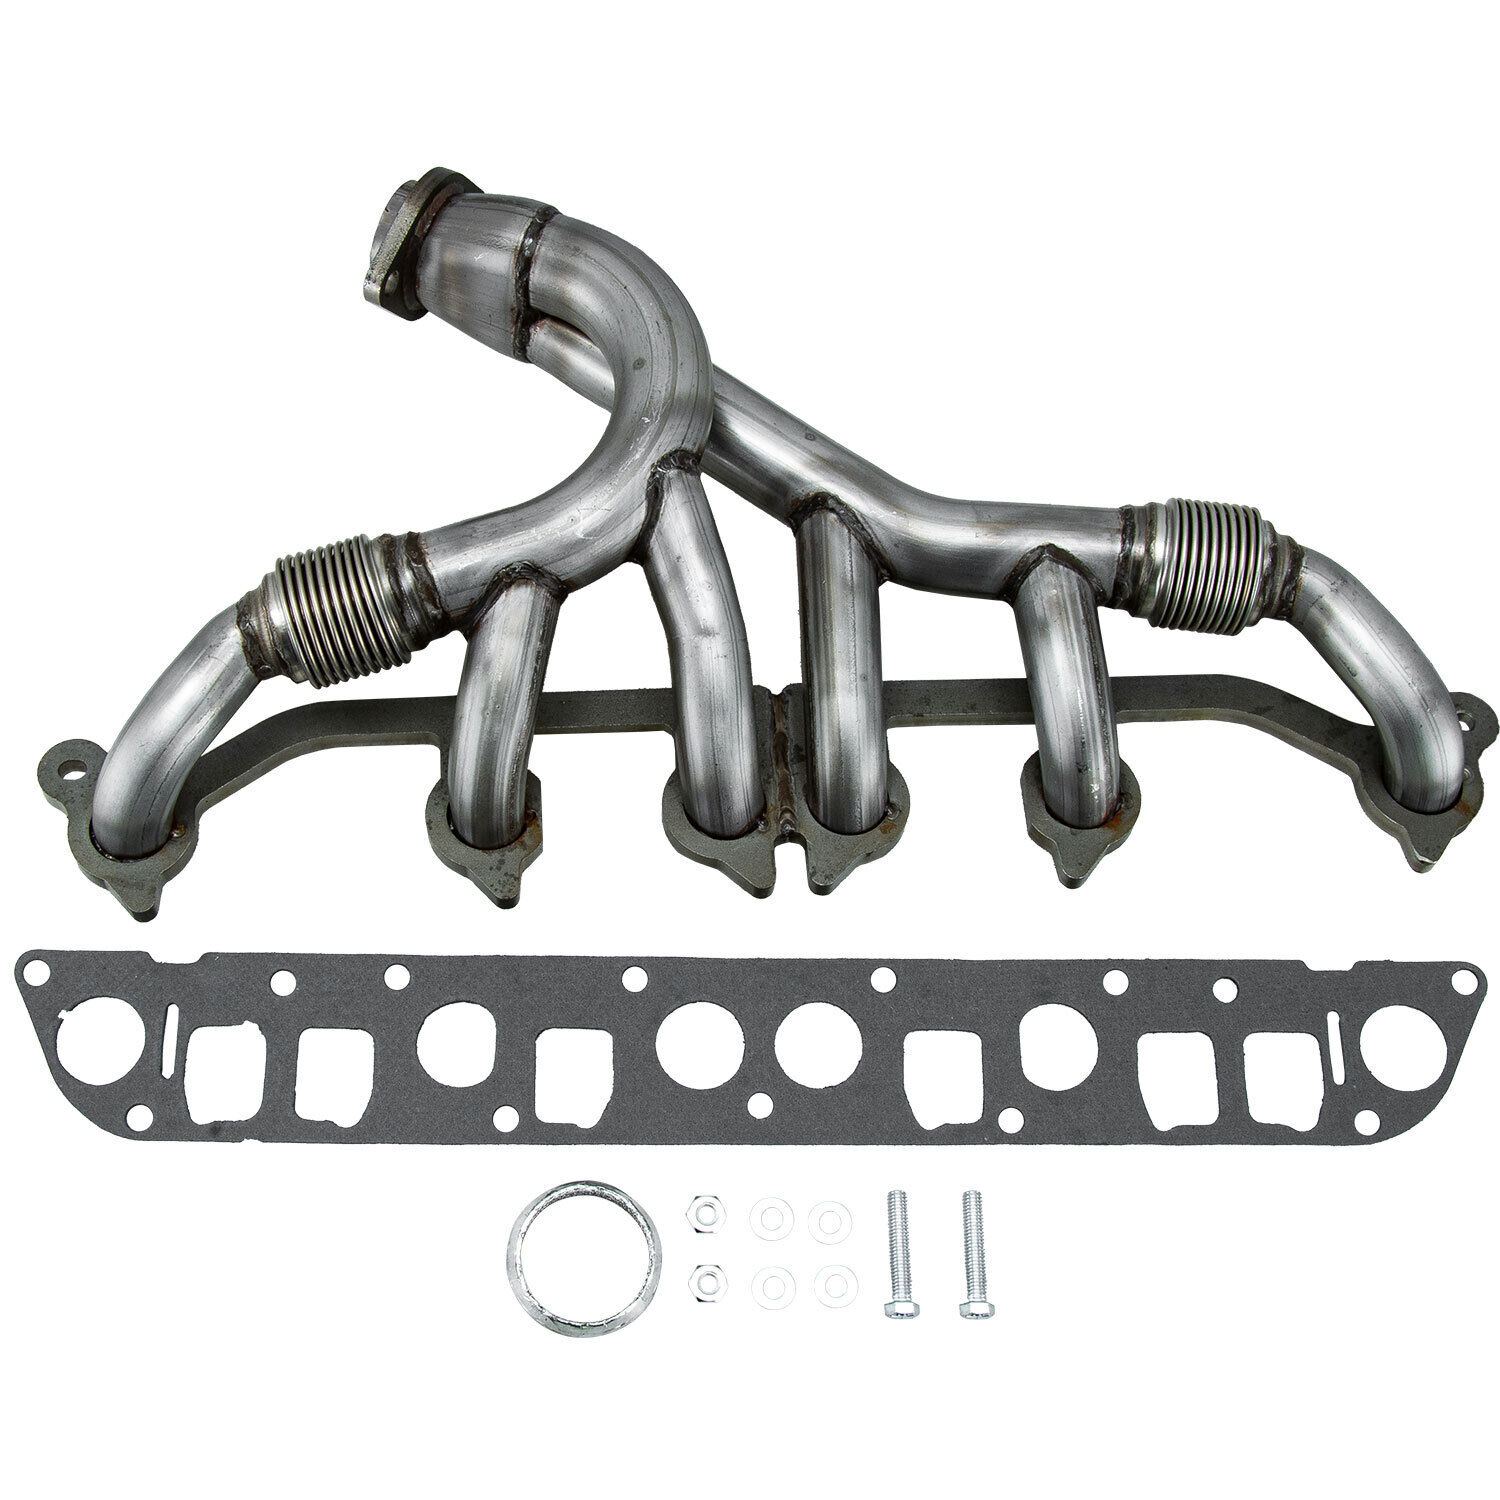 Exhaust Manifold w/Gasket Kit For JEEP Grand Cherokee Wrangler 4.0L 1991-1999